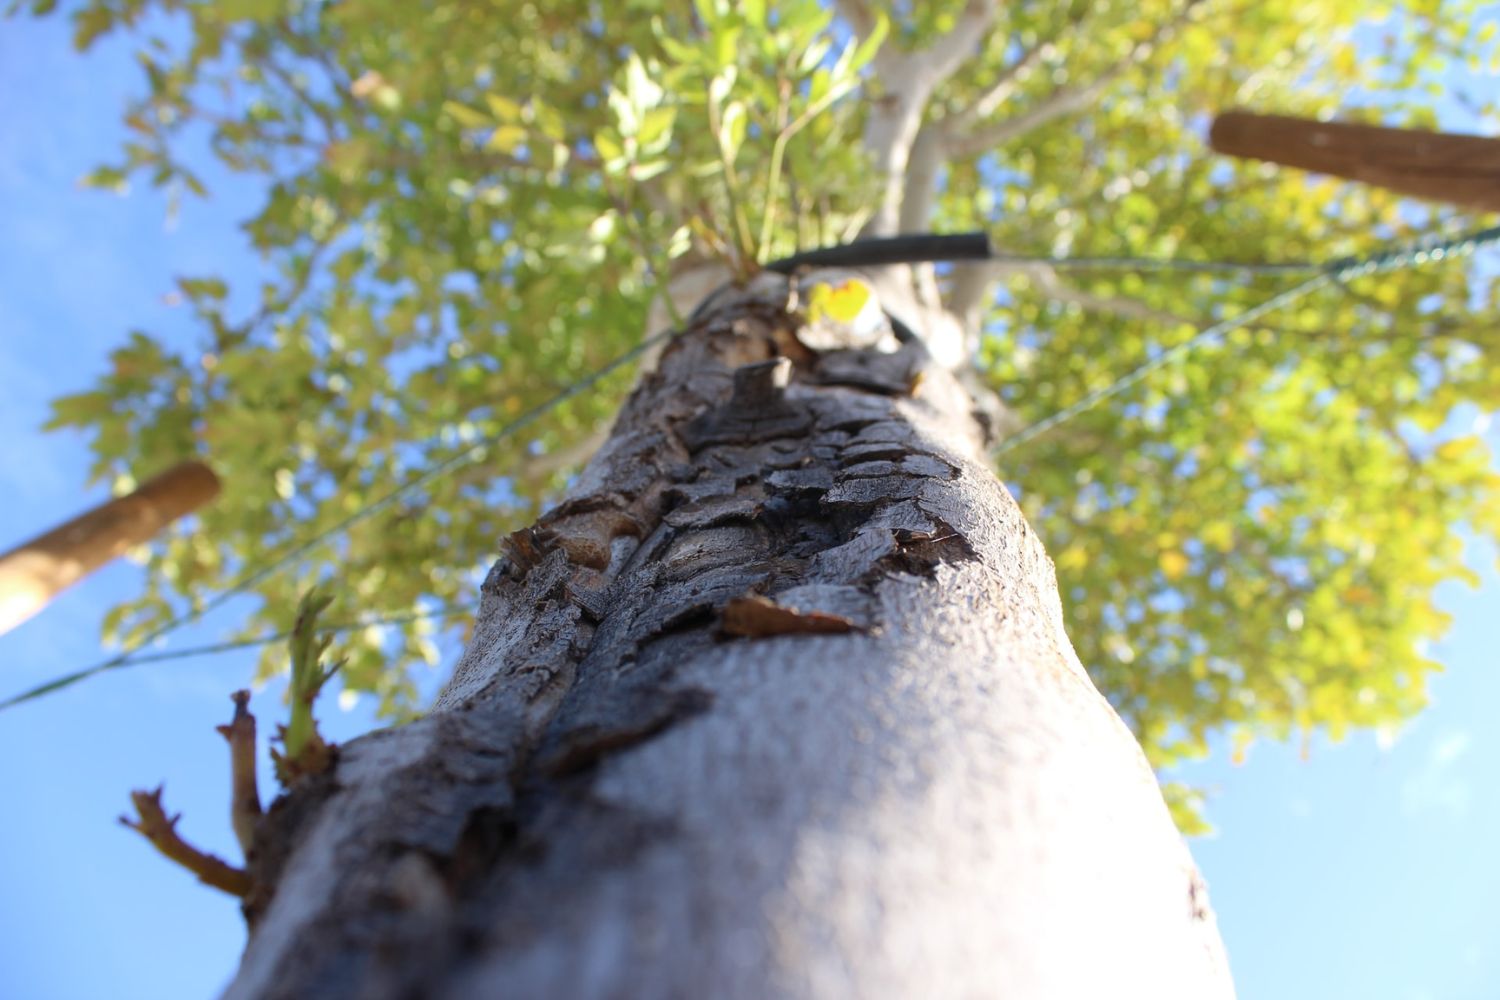 worm's eye view photo of a tree